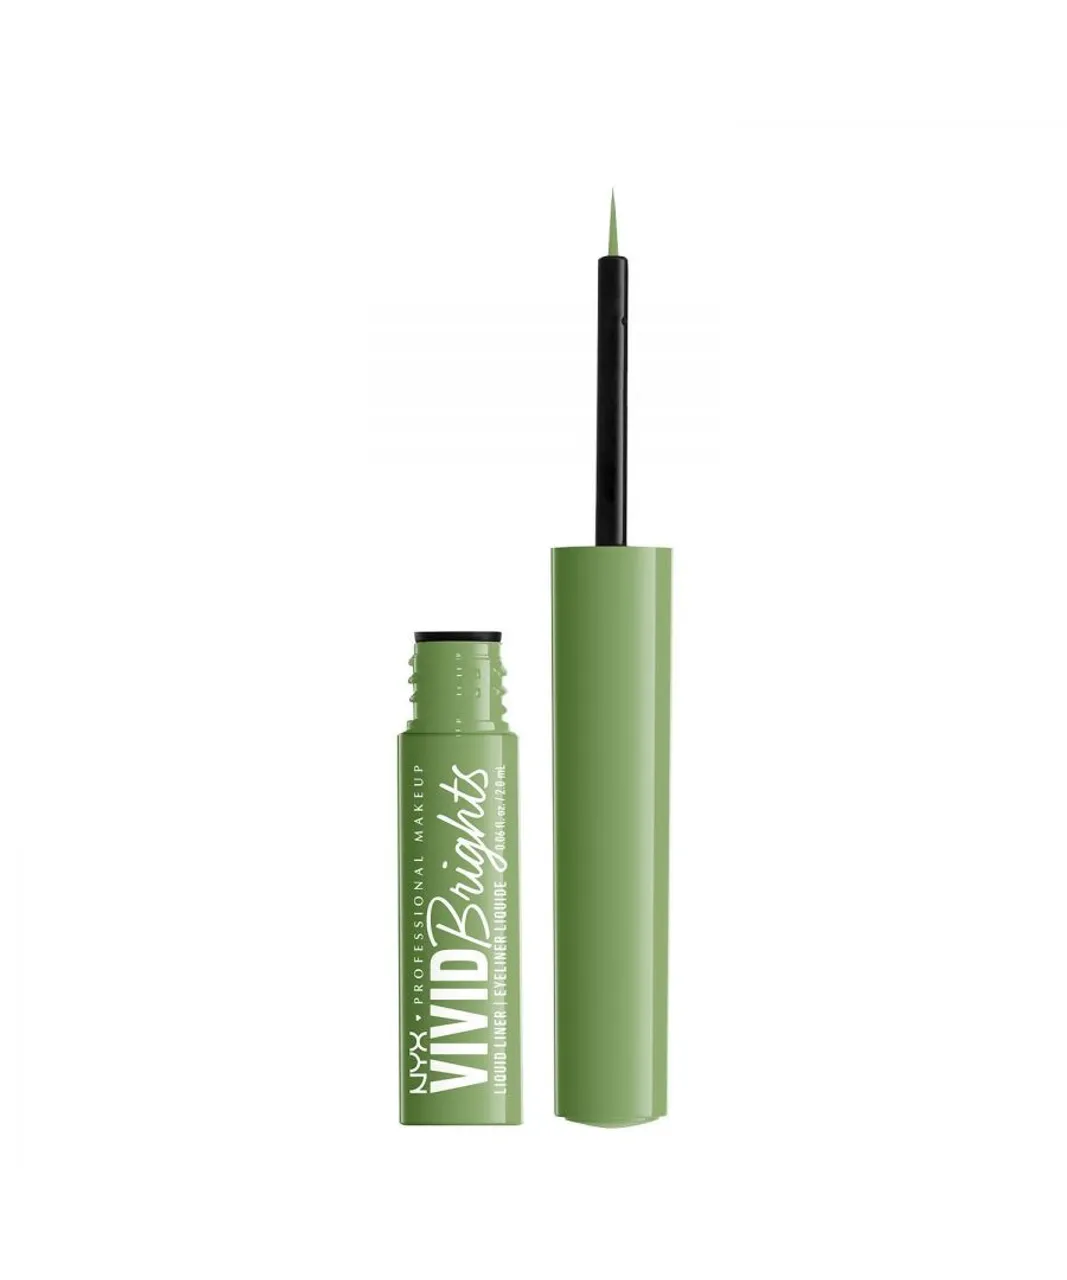 NYX Womens Professional Makeup Vivid Brights Eyeliner with Easy Glide Formula, Ghosted Green - One Size